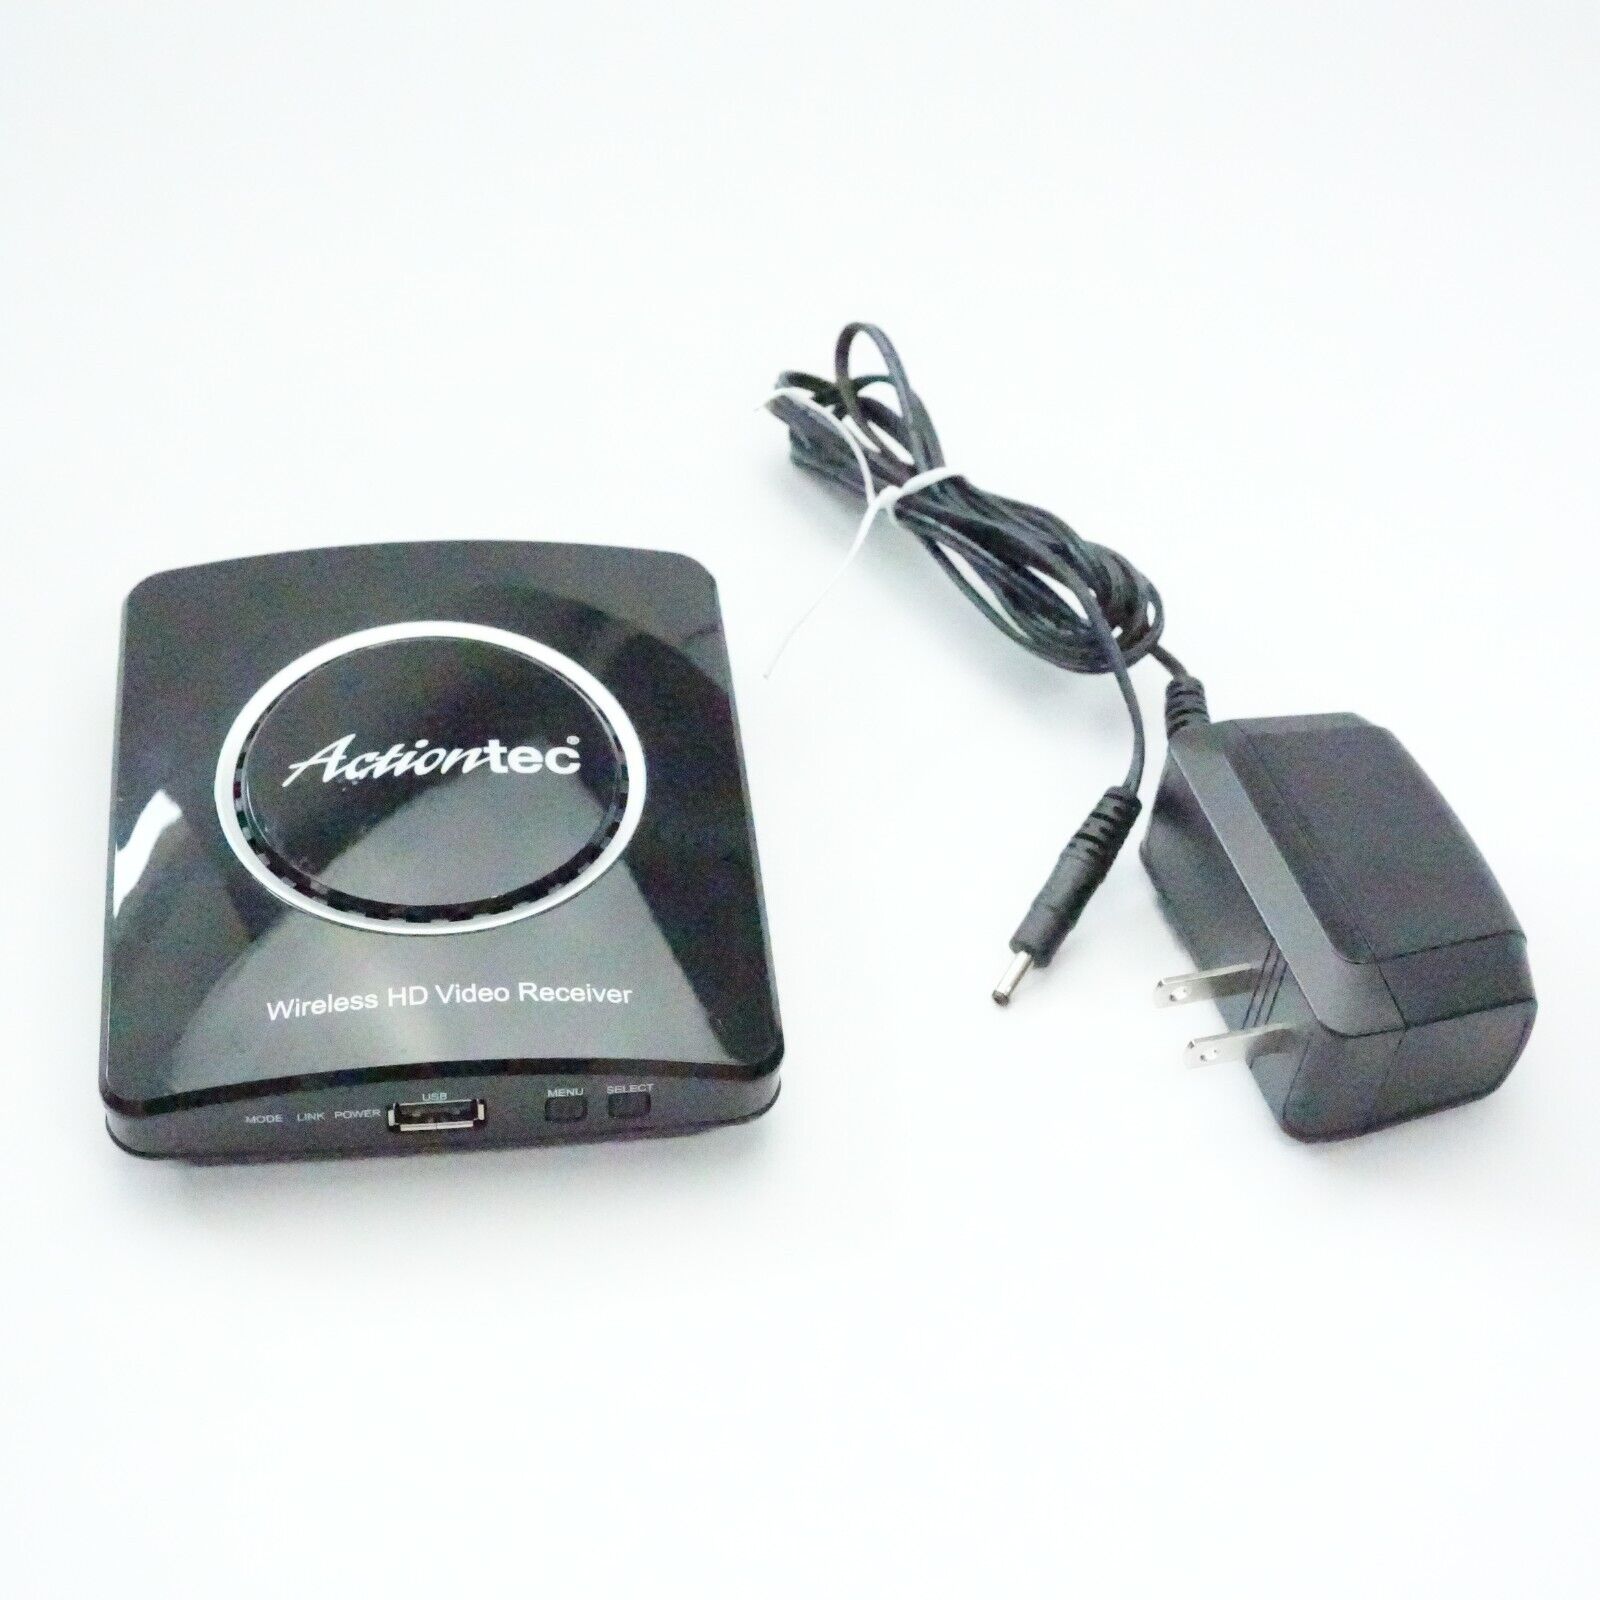 Action-Tec MWTV2RX Wireless HD Video Receiver W/ Power Adapter